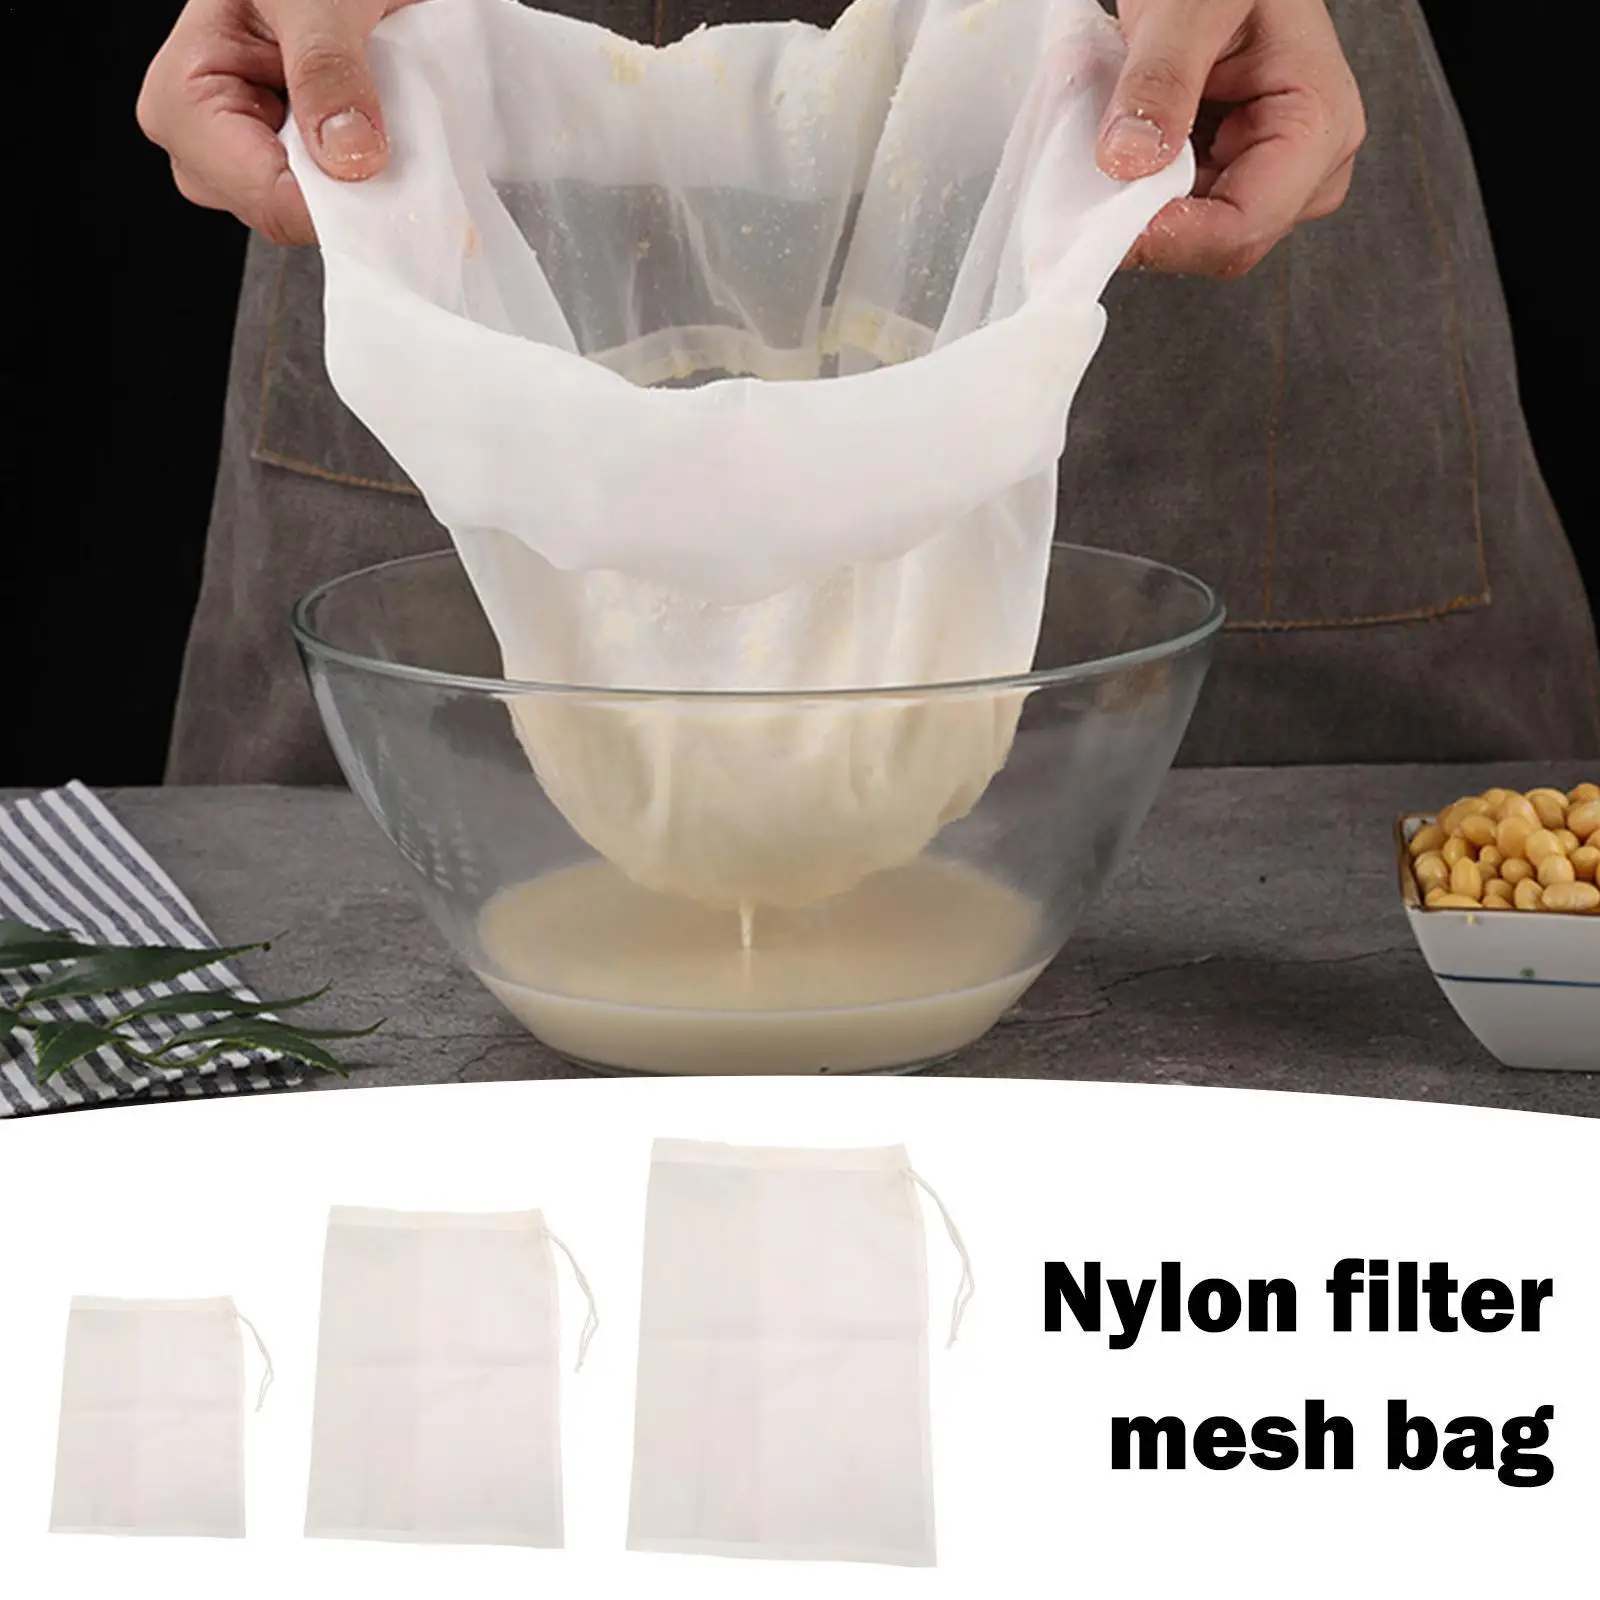 

1pcs Reusable Cheese Cloth Cheesecloth Bags For Straining Nut Milk Bags Cold Brew Bags Tea Yogurt Coffee Filter Strainers B F7b6